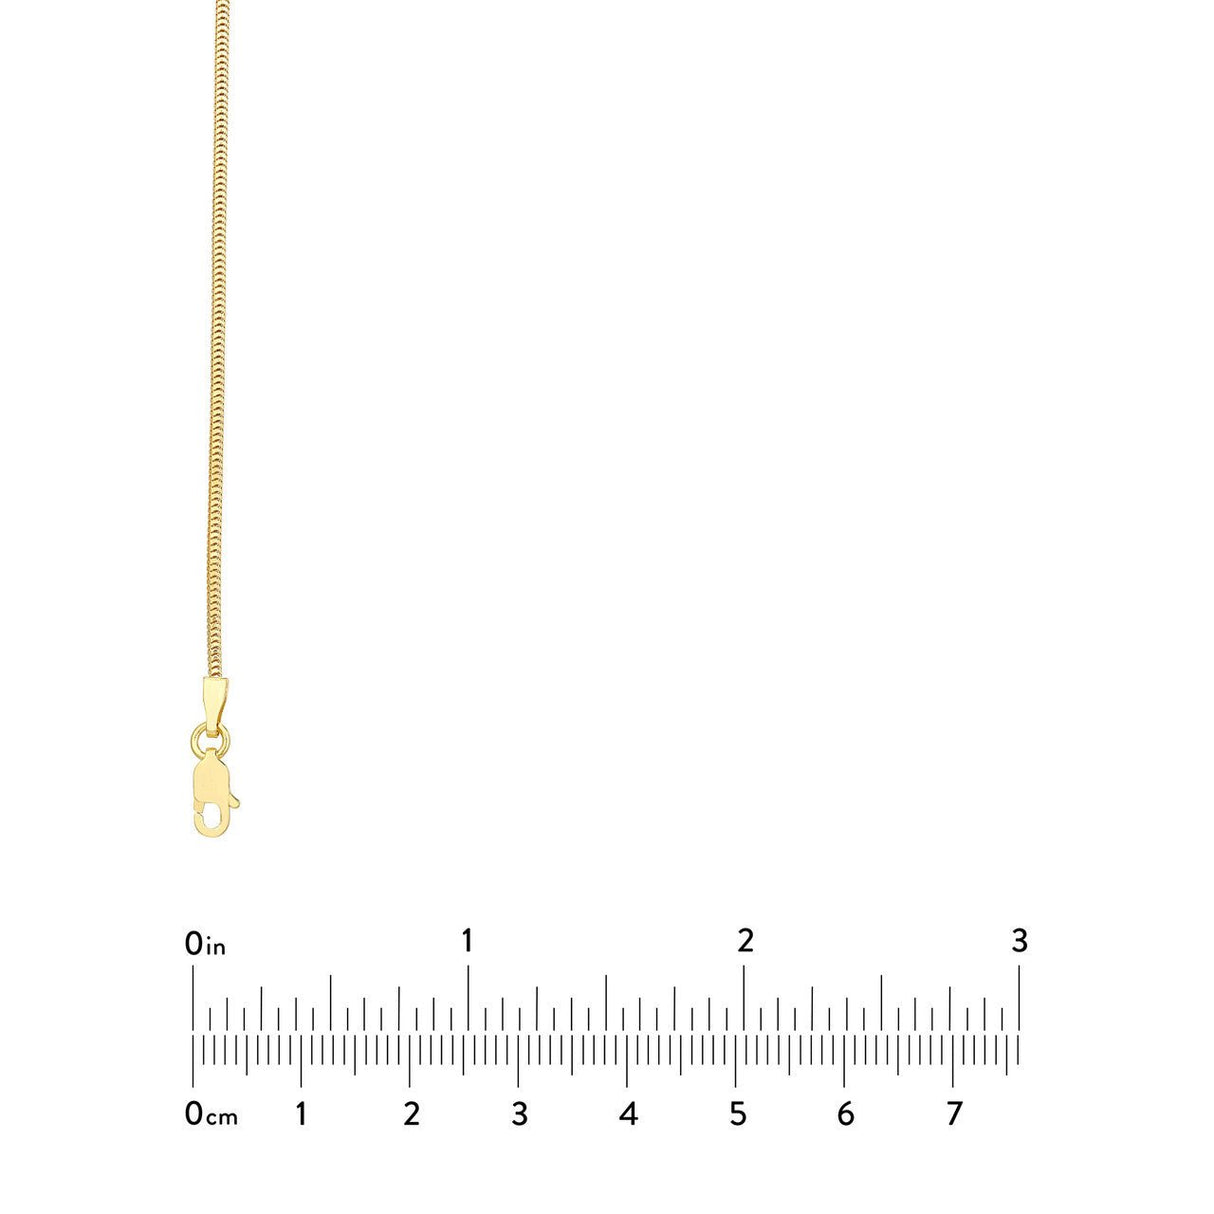 10K Gold Chain, 20 inches, 1.4mm Snake Chain with Lobster Lock, Gold Chain Necklace, - Diamond Origin